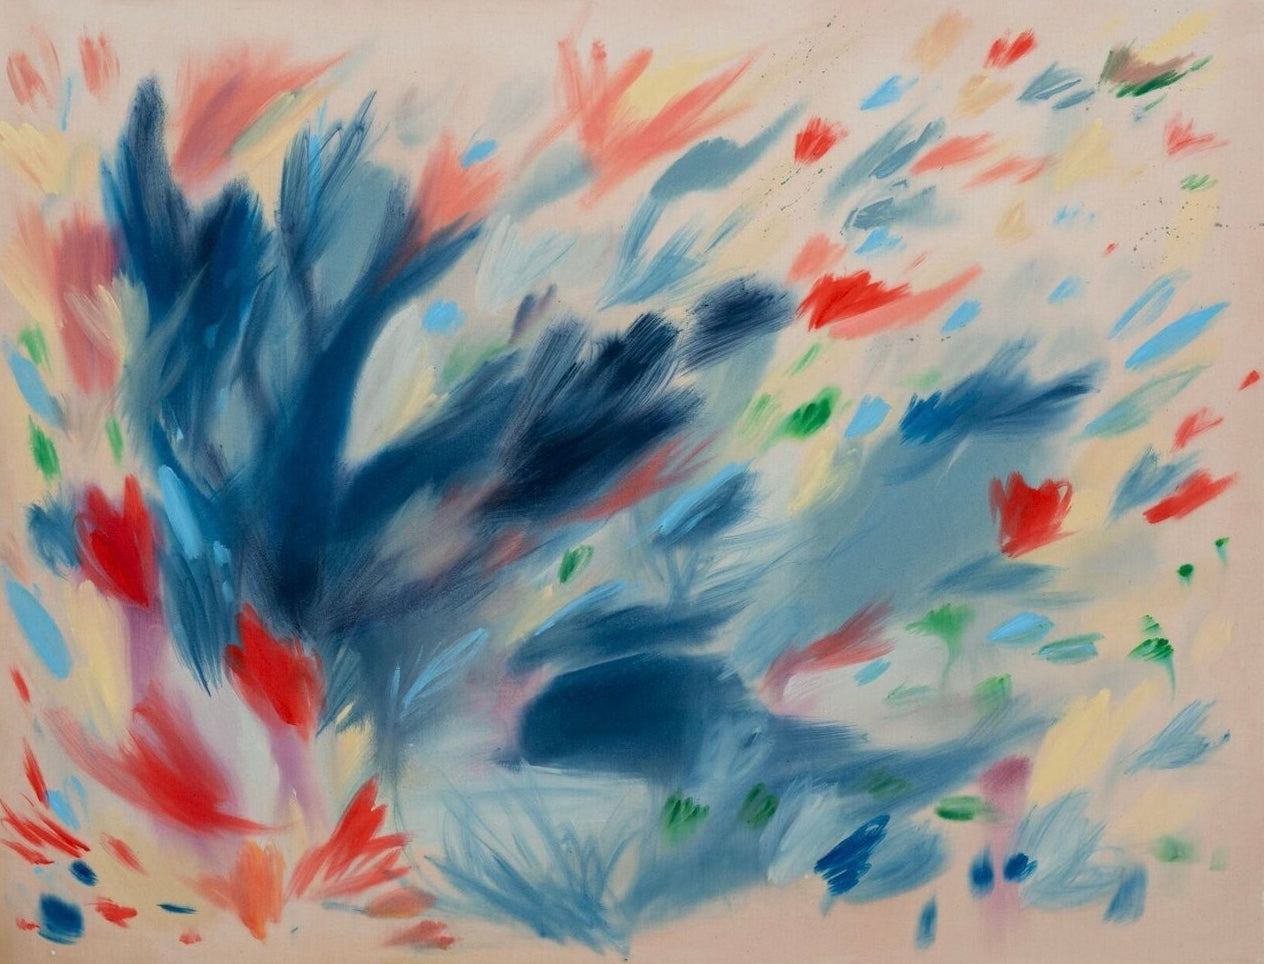 sydney cortright bright light pink painting with brushes of blue, red and green